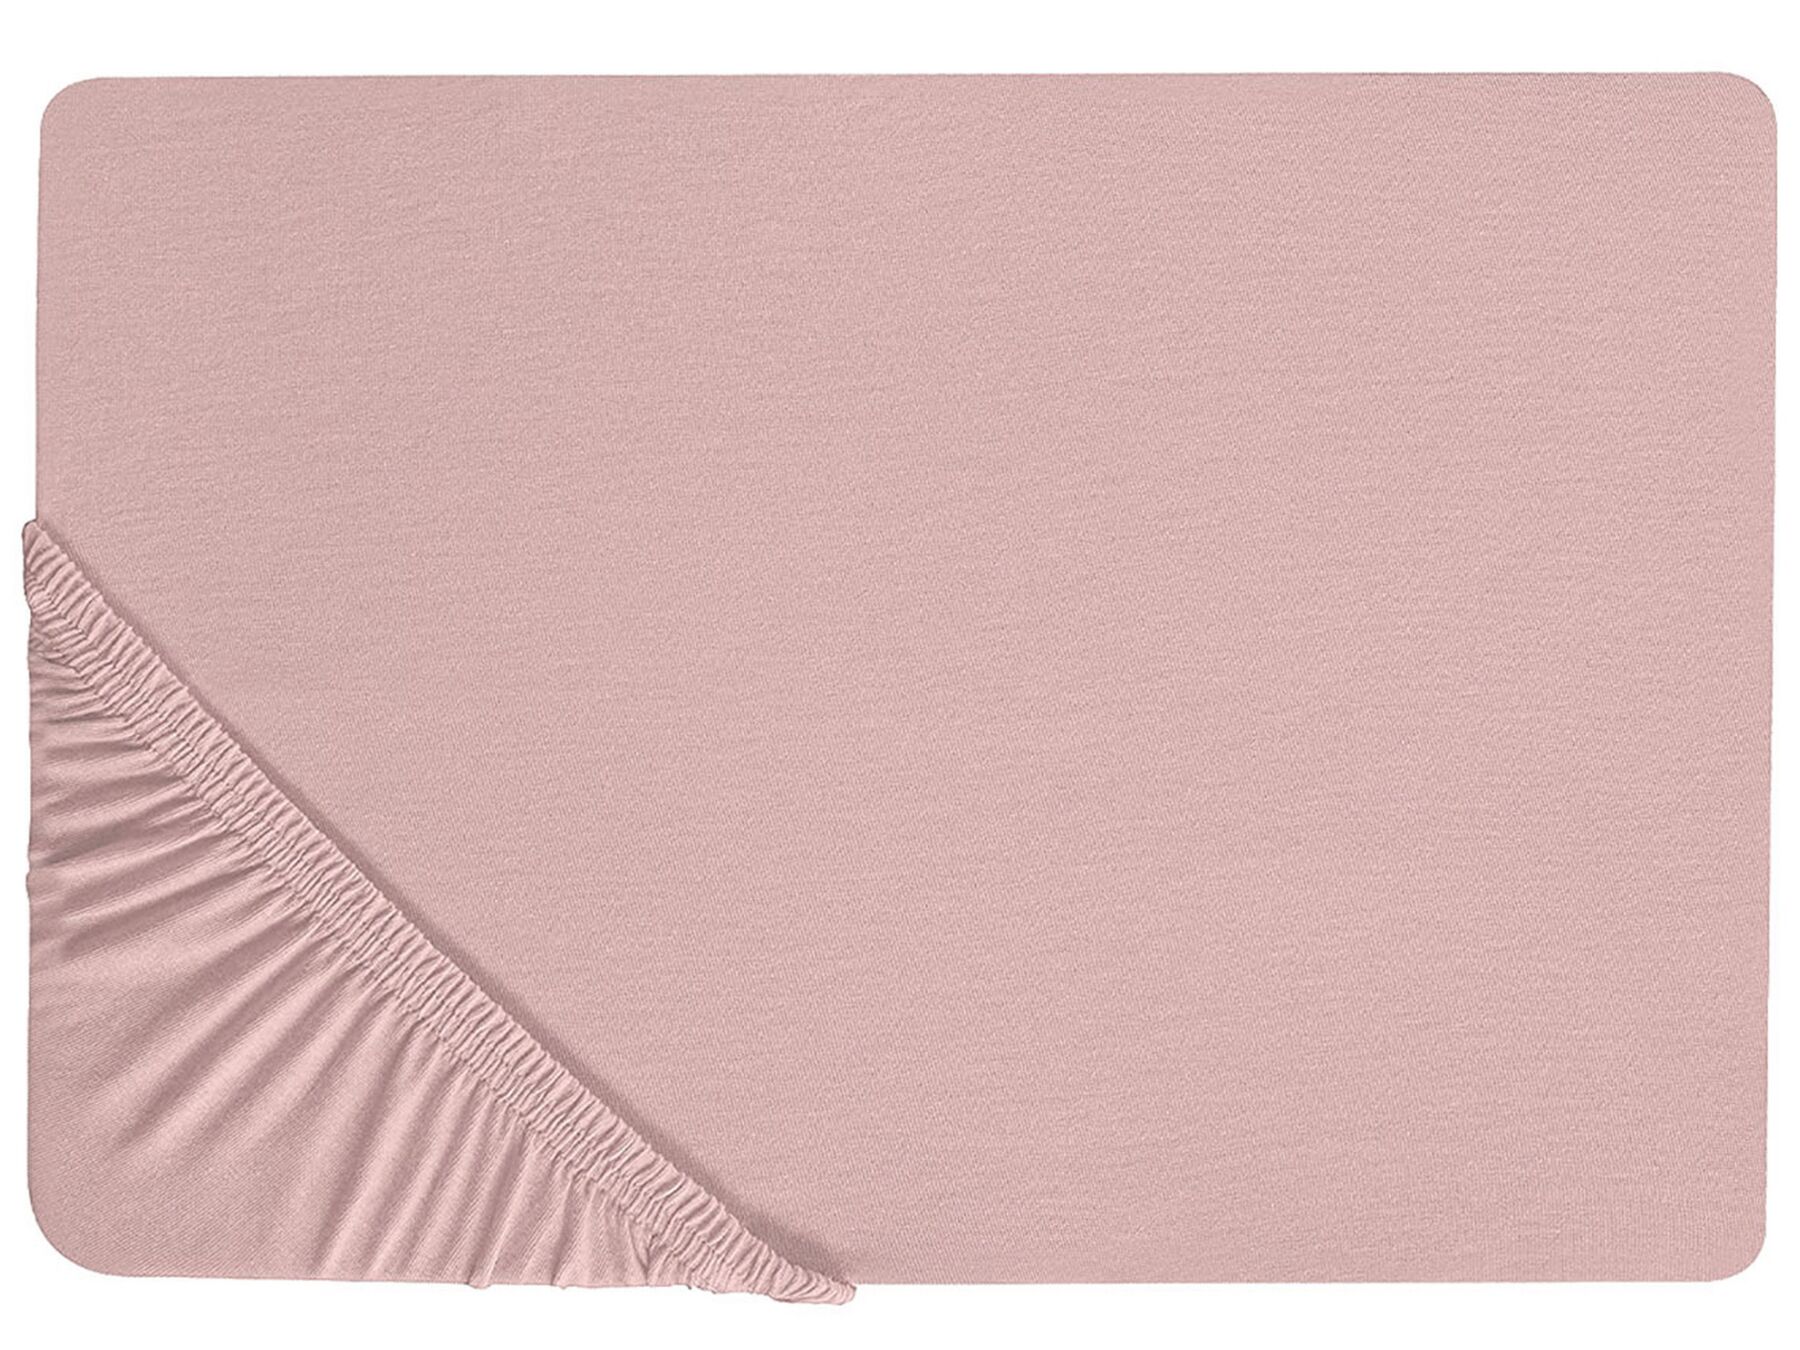 Cotton Fitted Sheet 180 x 200 cm Pink HOFUF_815918